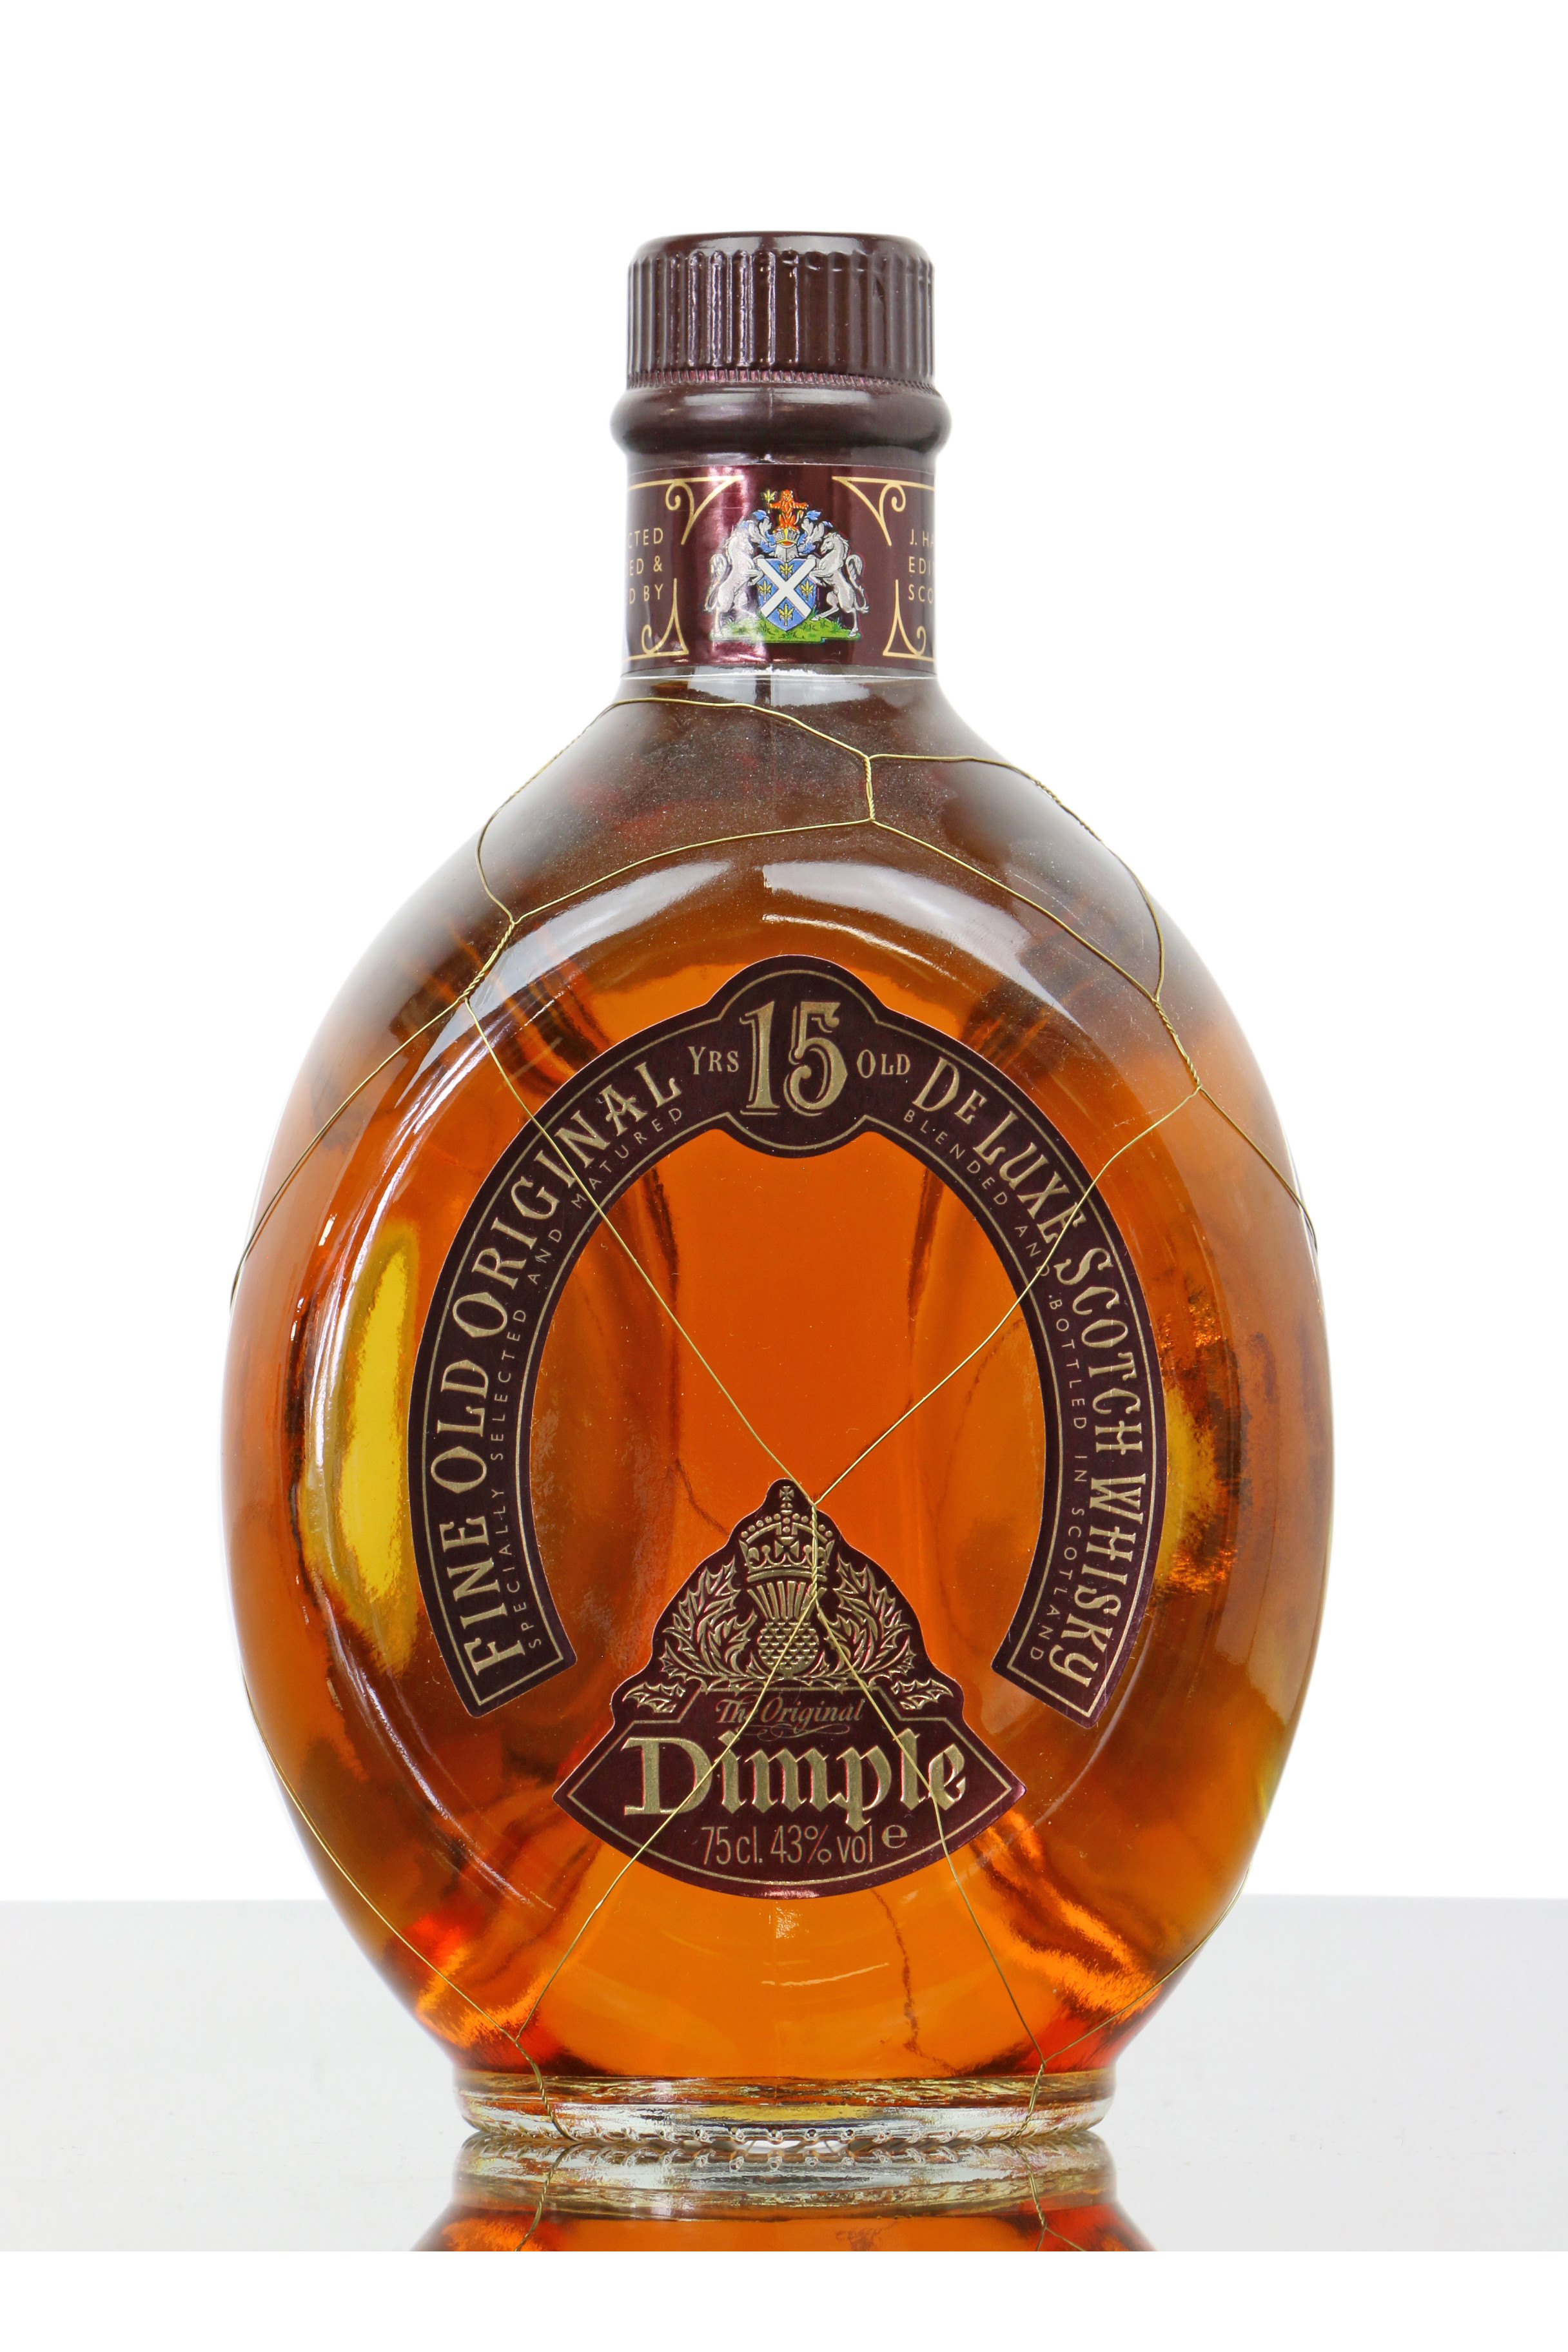 Haig Dimple 15 Years Old Fine Old Original Just Whisky Auctions